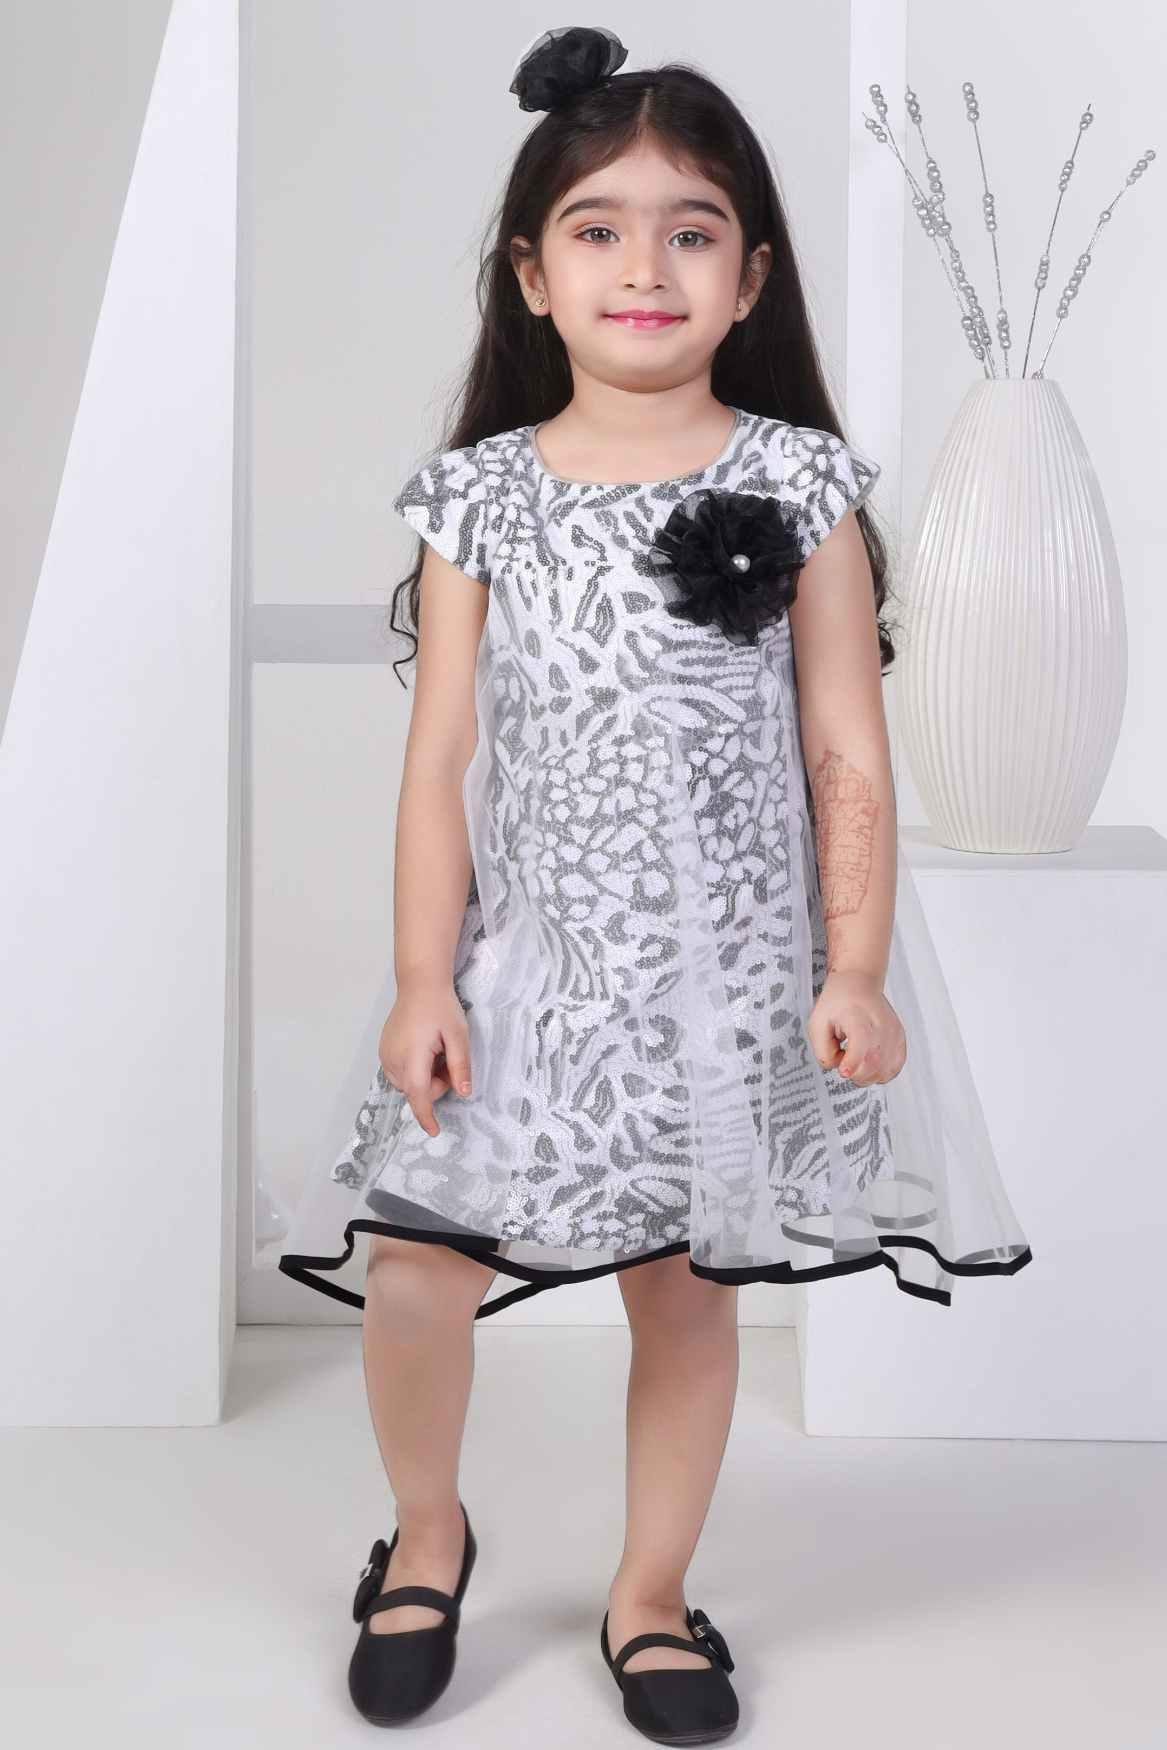 Stylish Black Printed Frock With Tulle Layer For Girls - Lagorii Kids